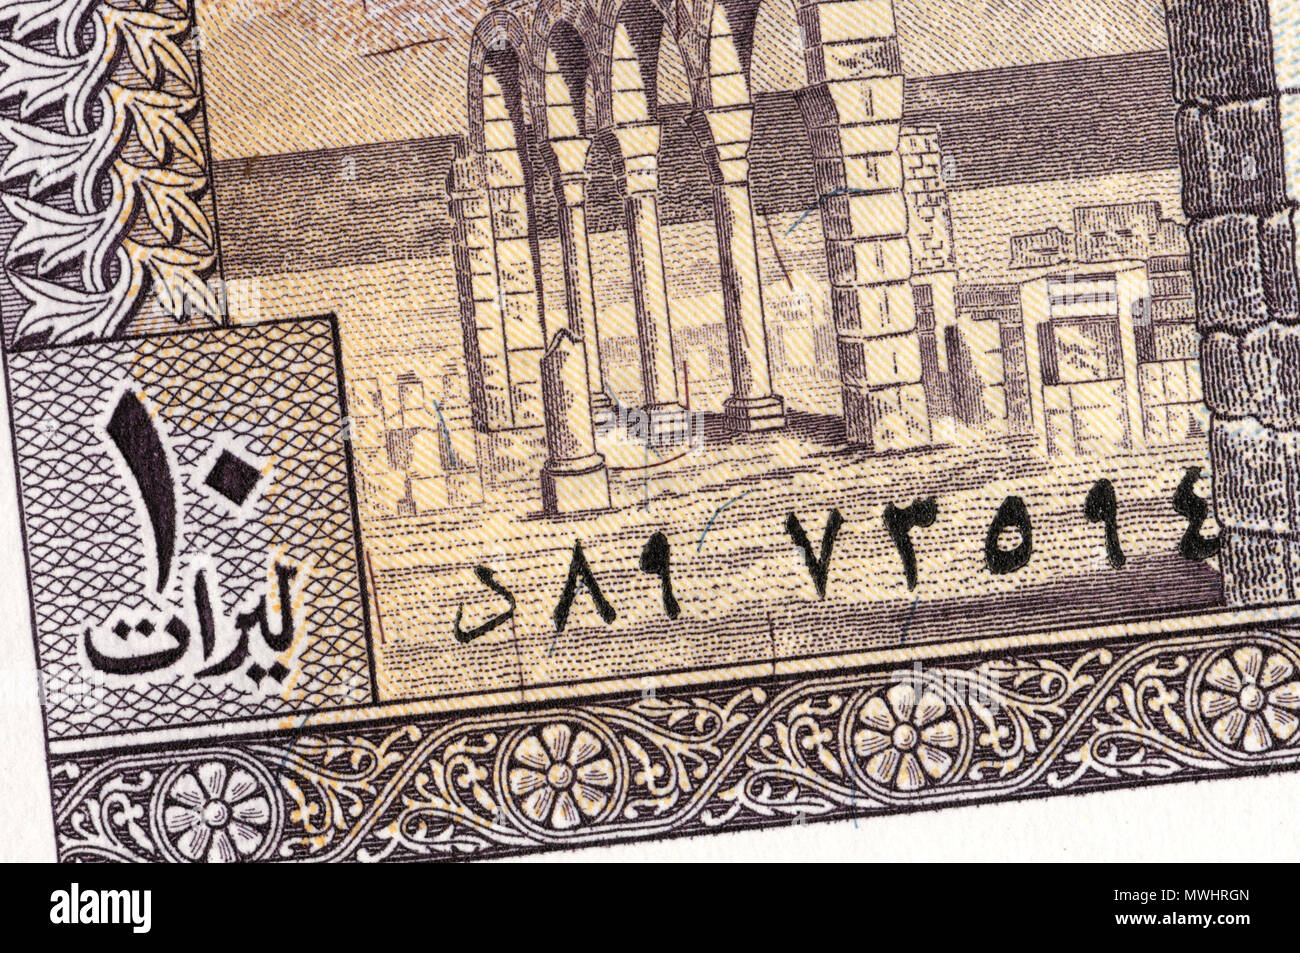 Detail from a Ten pound Lebanon banknote showing serial number in Arabic script Stock Photo